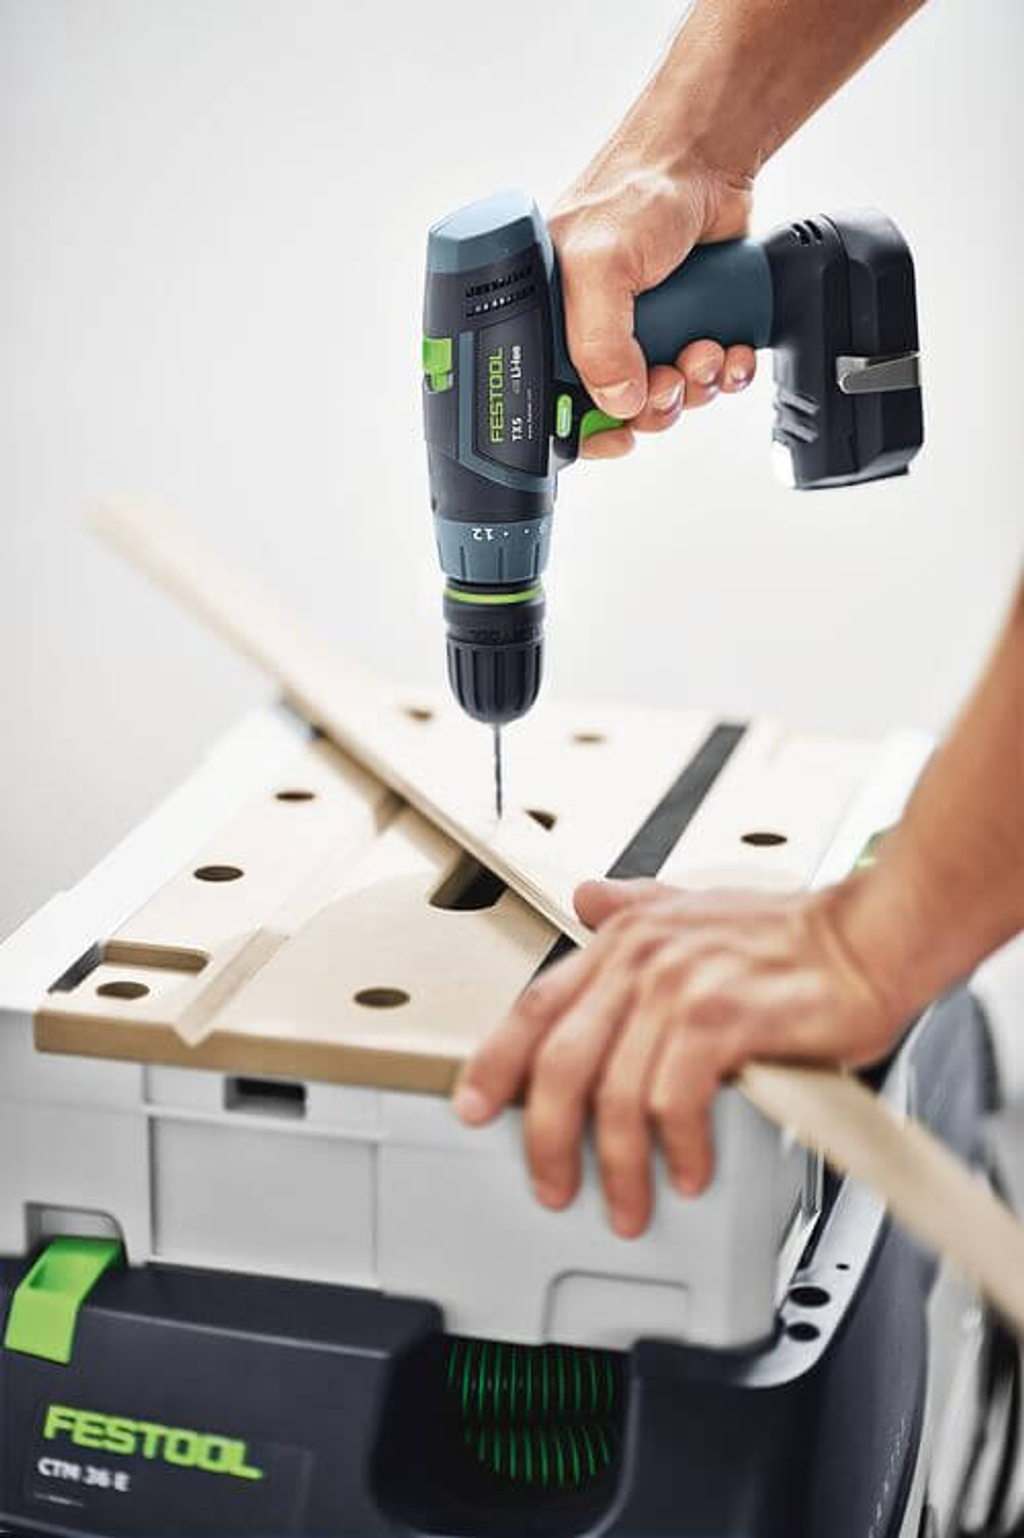 This Festool cordless screwdriver is perfect for screwdriving in wood and more. Easy and affordable rental with BIYU.